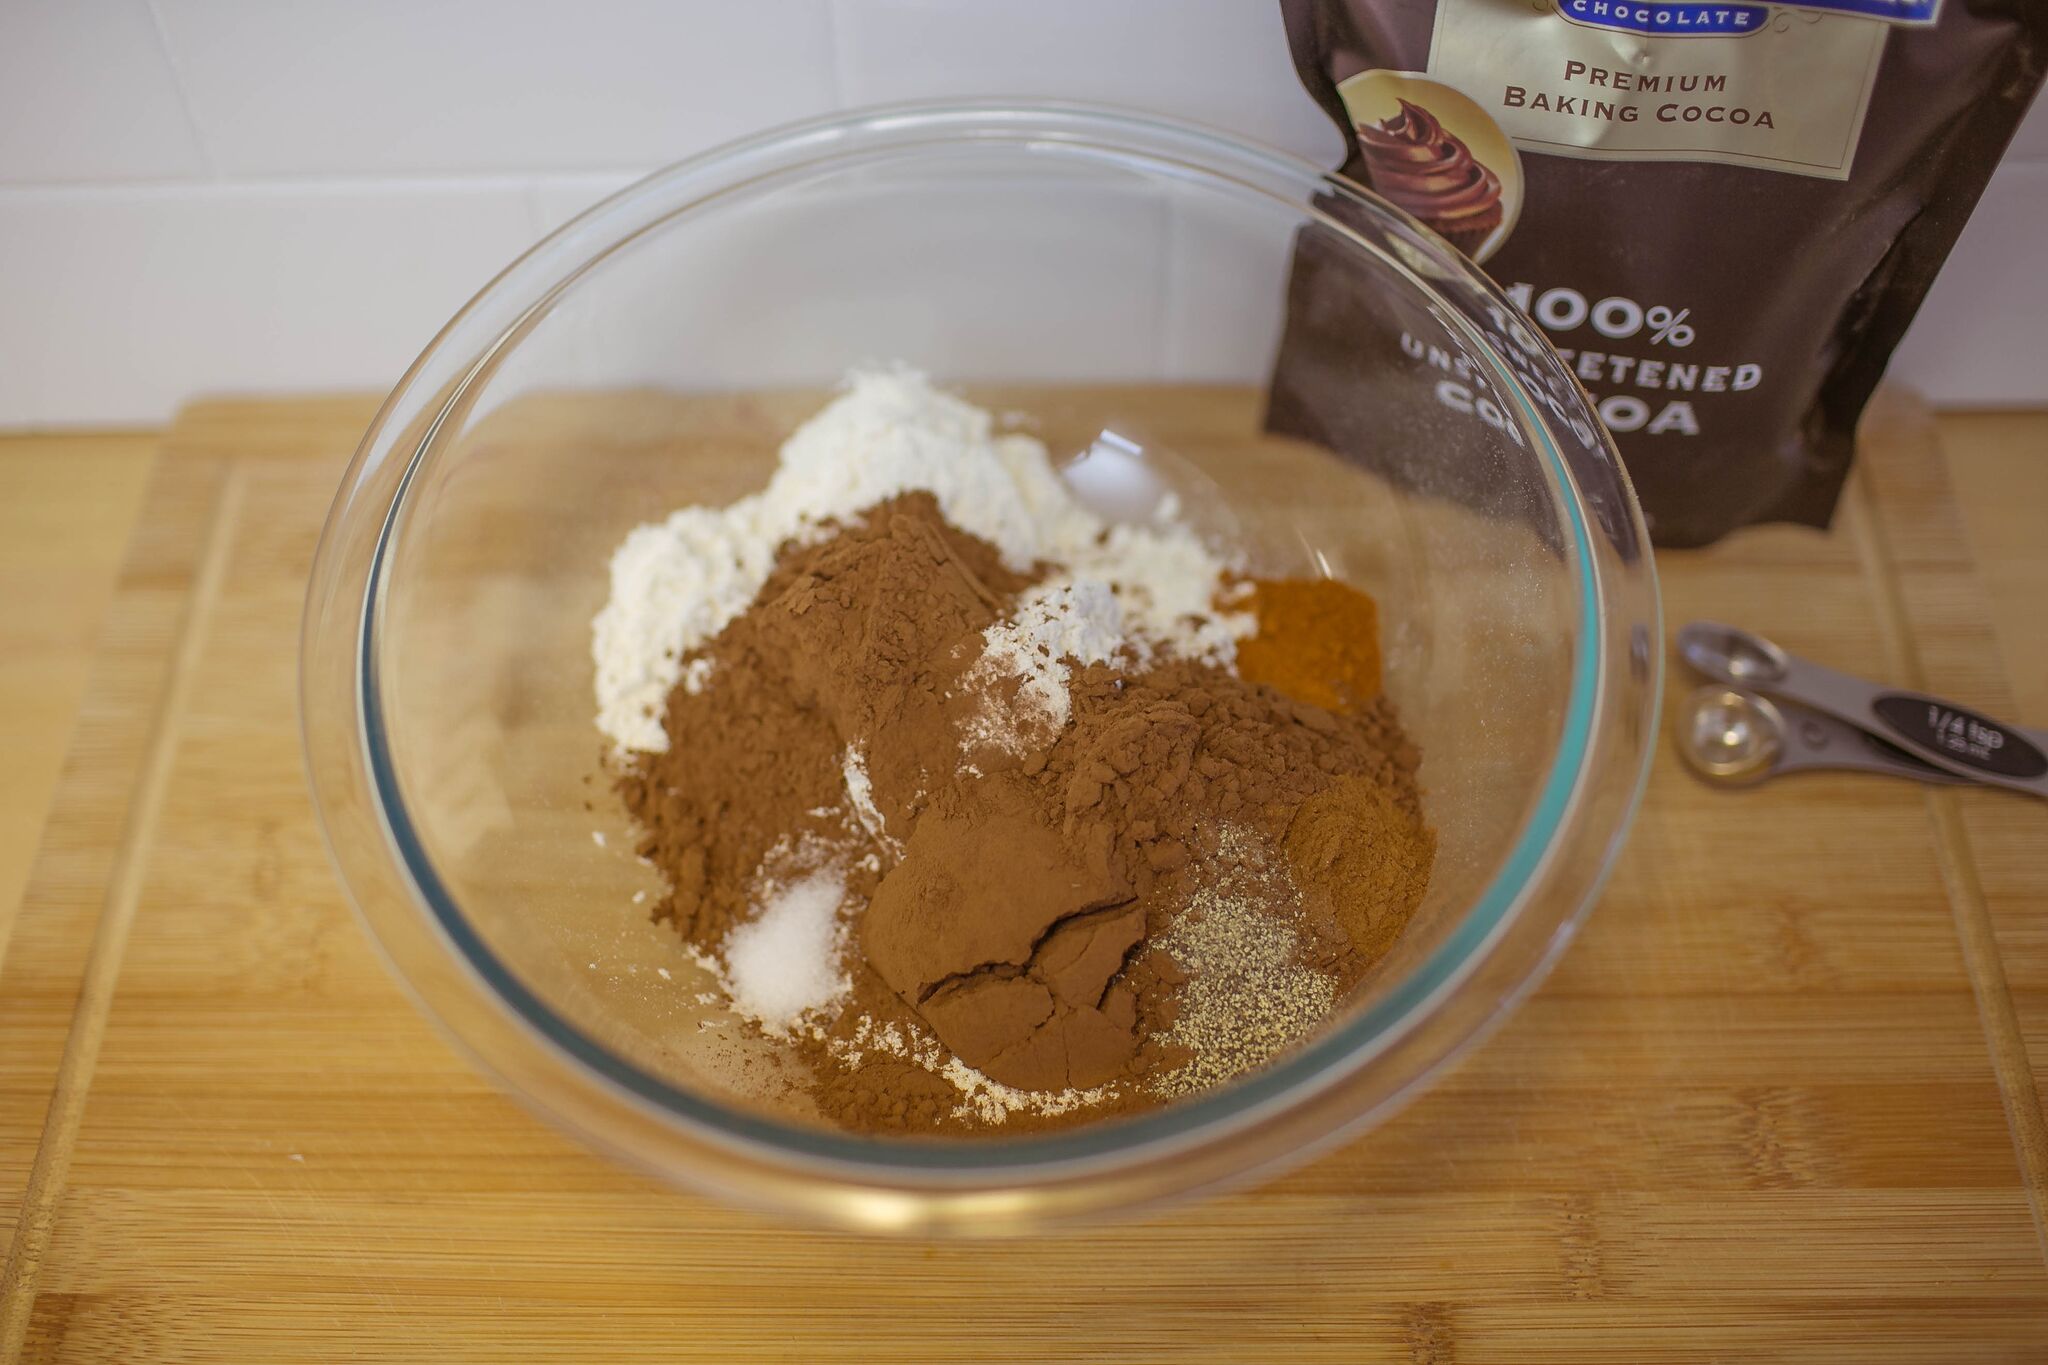 Mix together the flour, cocoa powder, cinnamon, salt, pepper and cayenne.